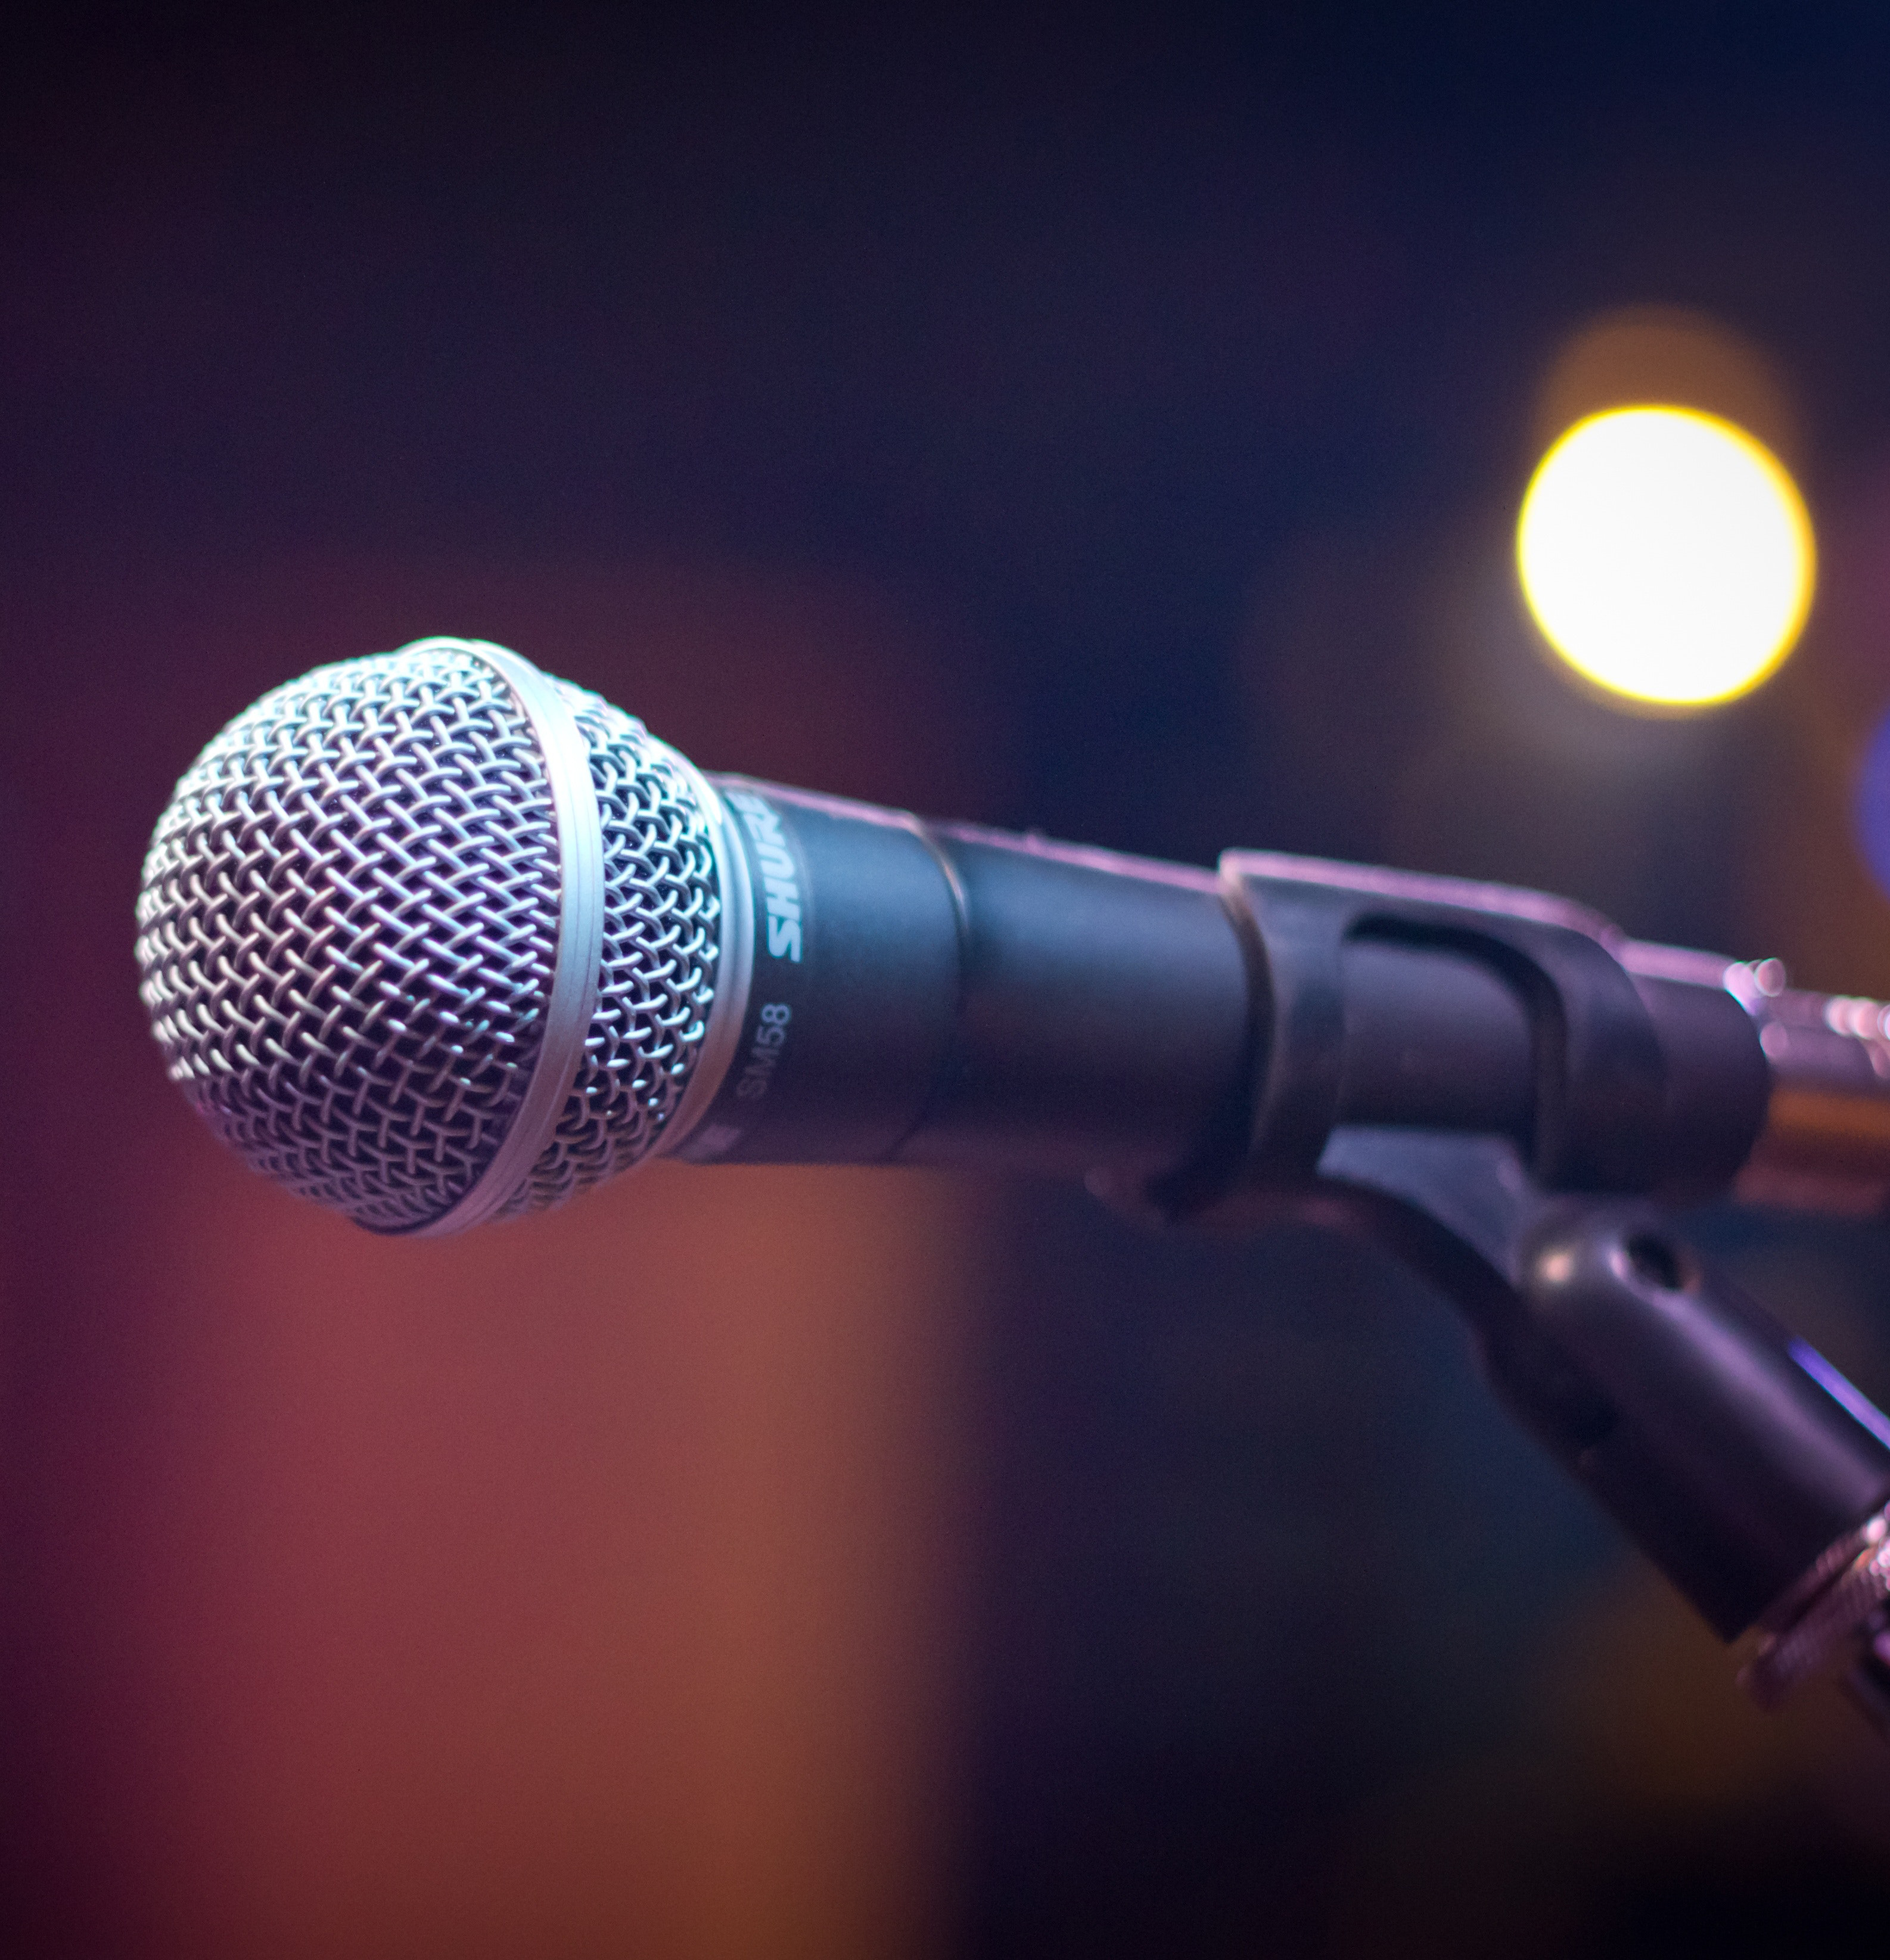 Photograph of a microphone